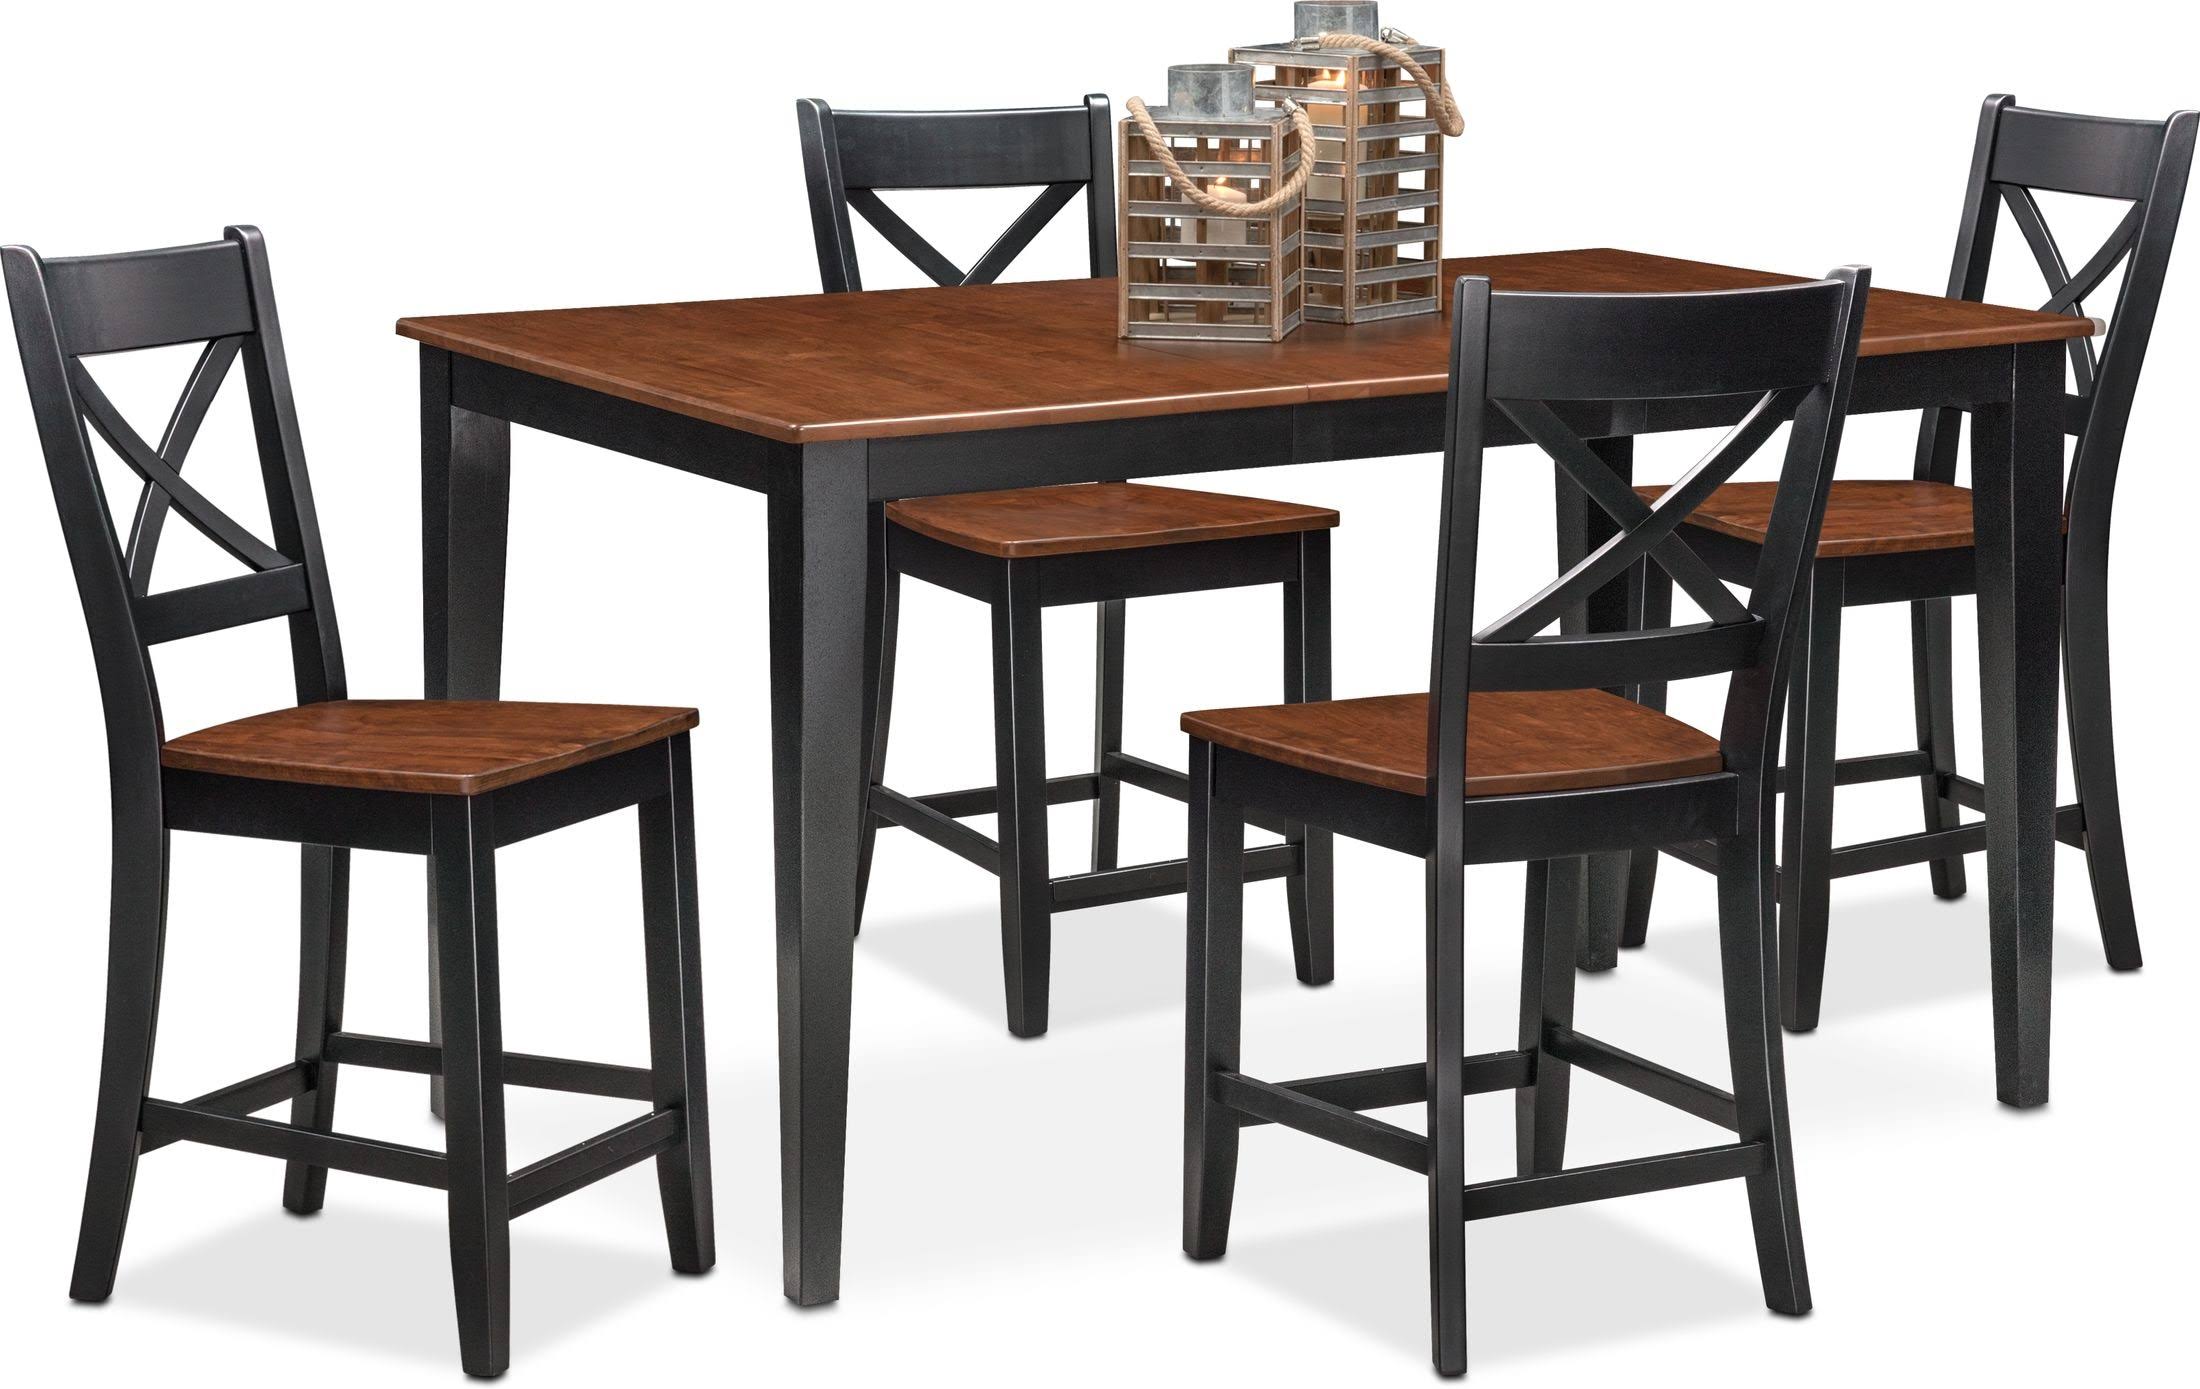 Nantucket Counter-Height Dining Table and 4 Dining Chairs - Black and ...